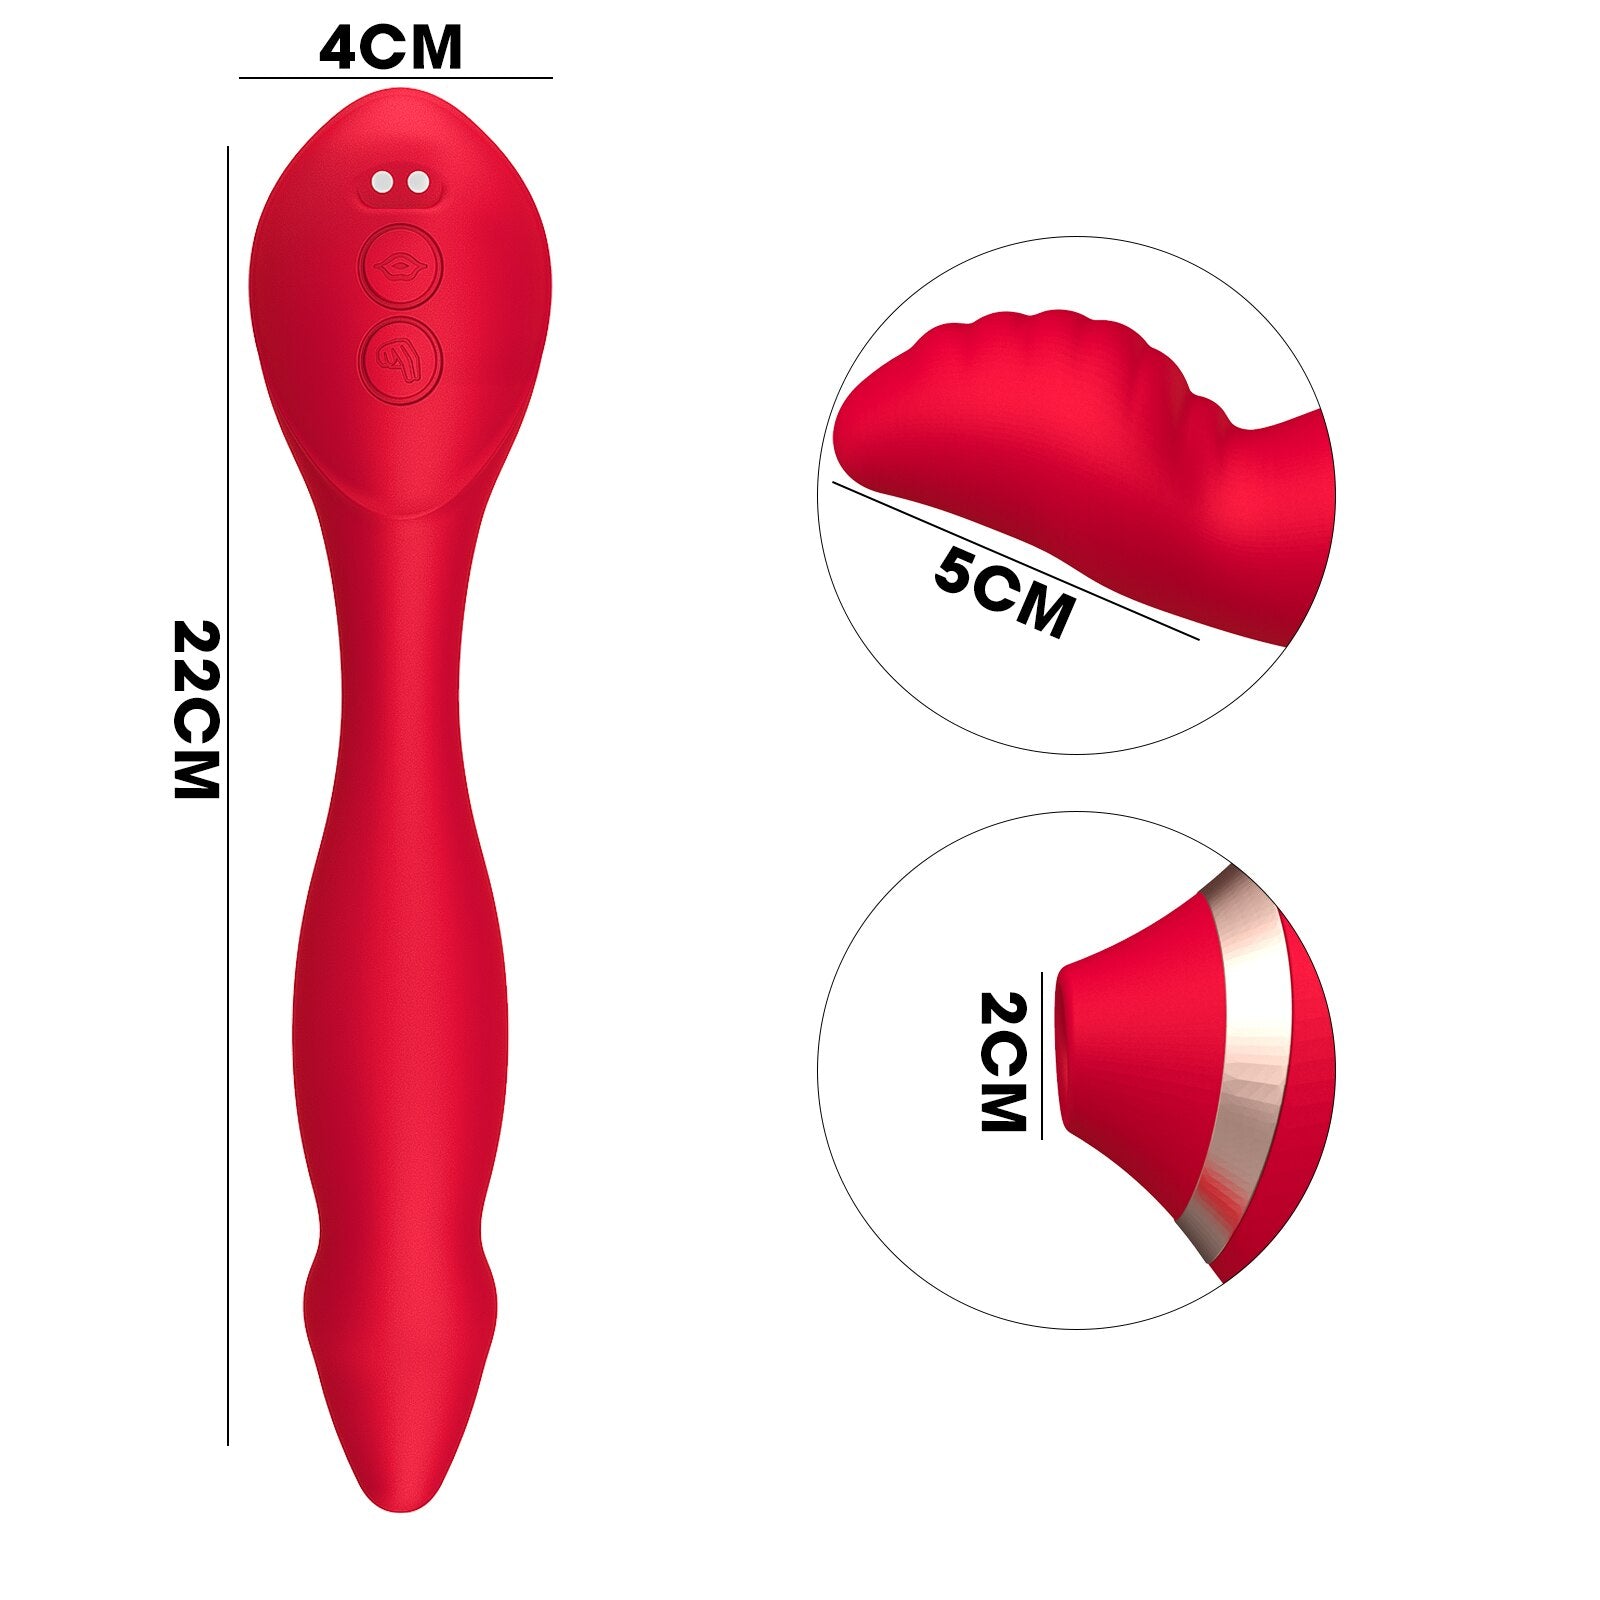 10 Frequency Sucker Vibrator Blow Toy - Lusty Age